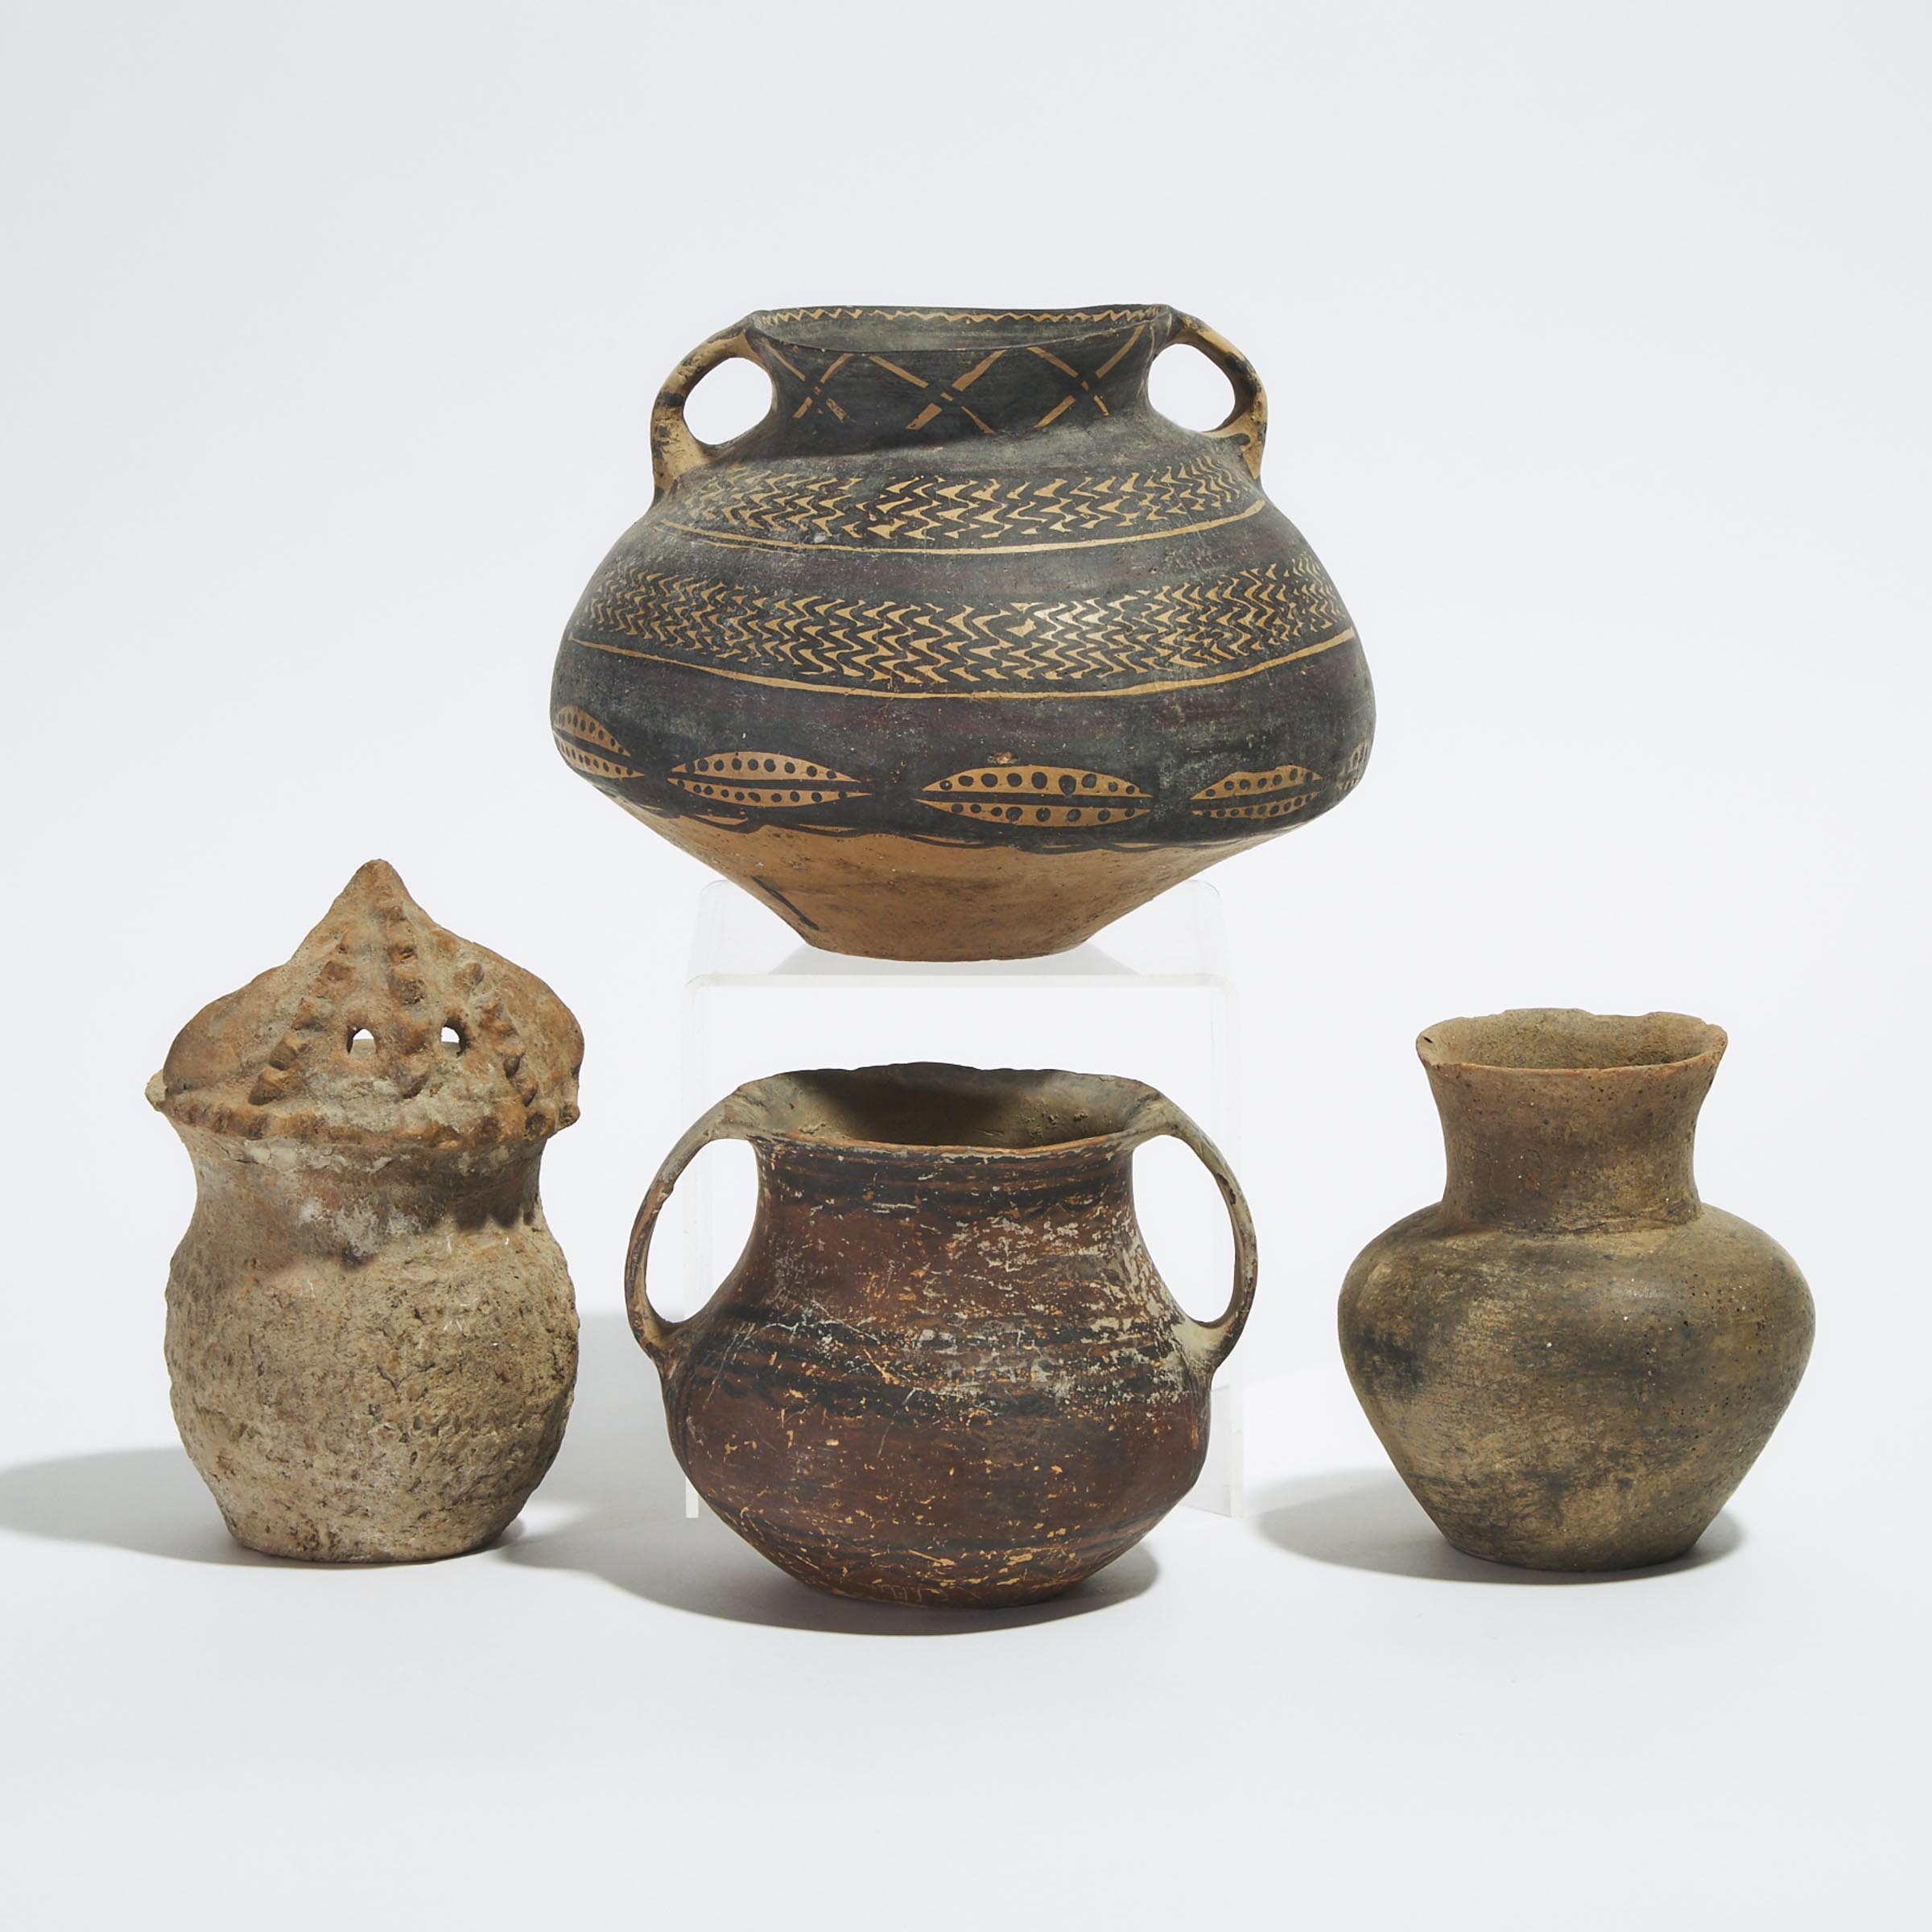 A Group of Four Pottery Jars, Neolithic Period